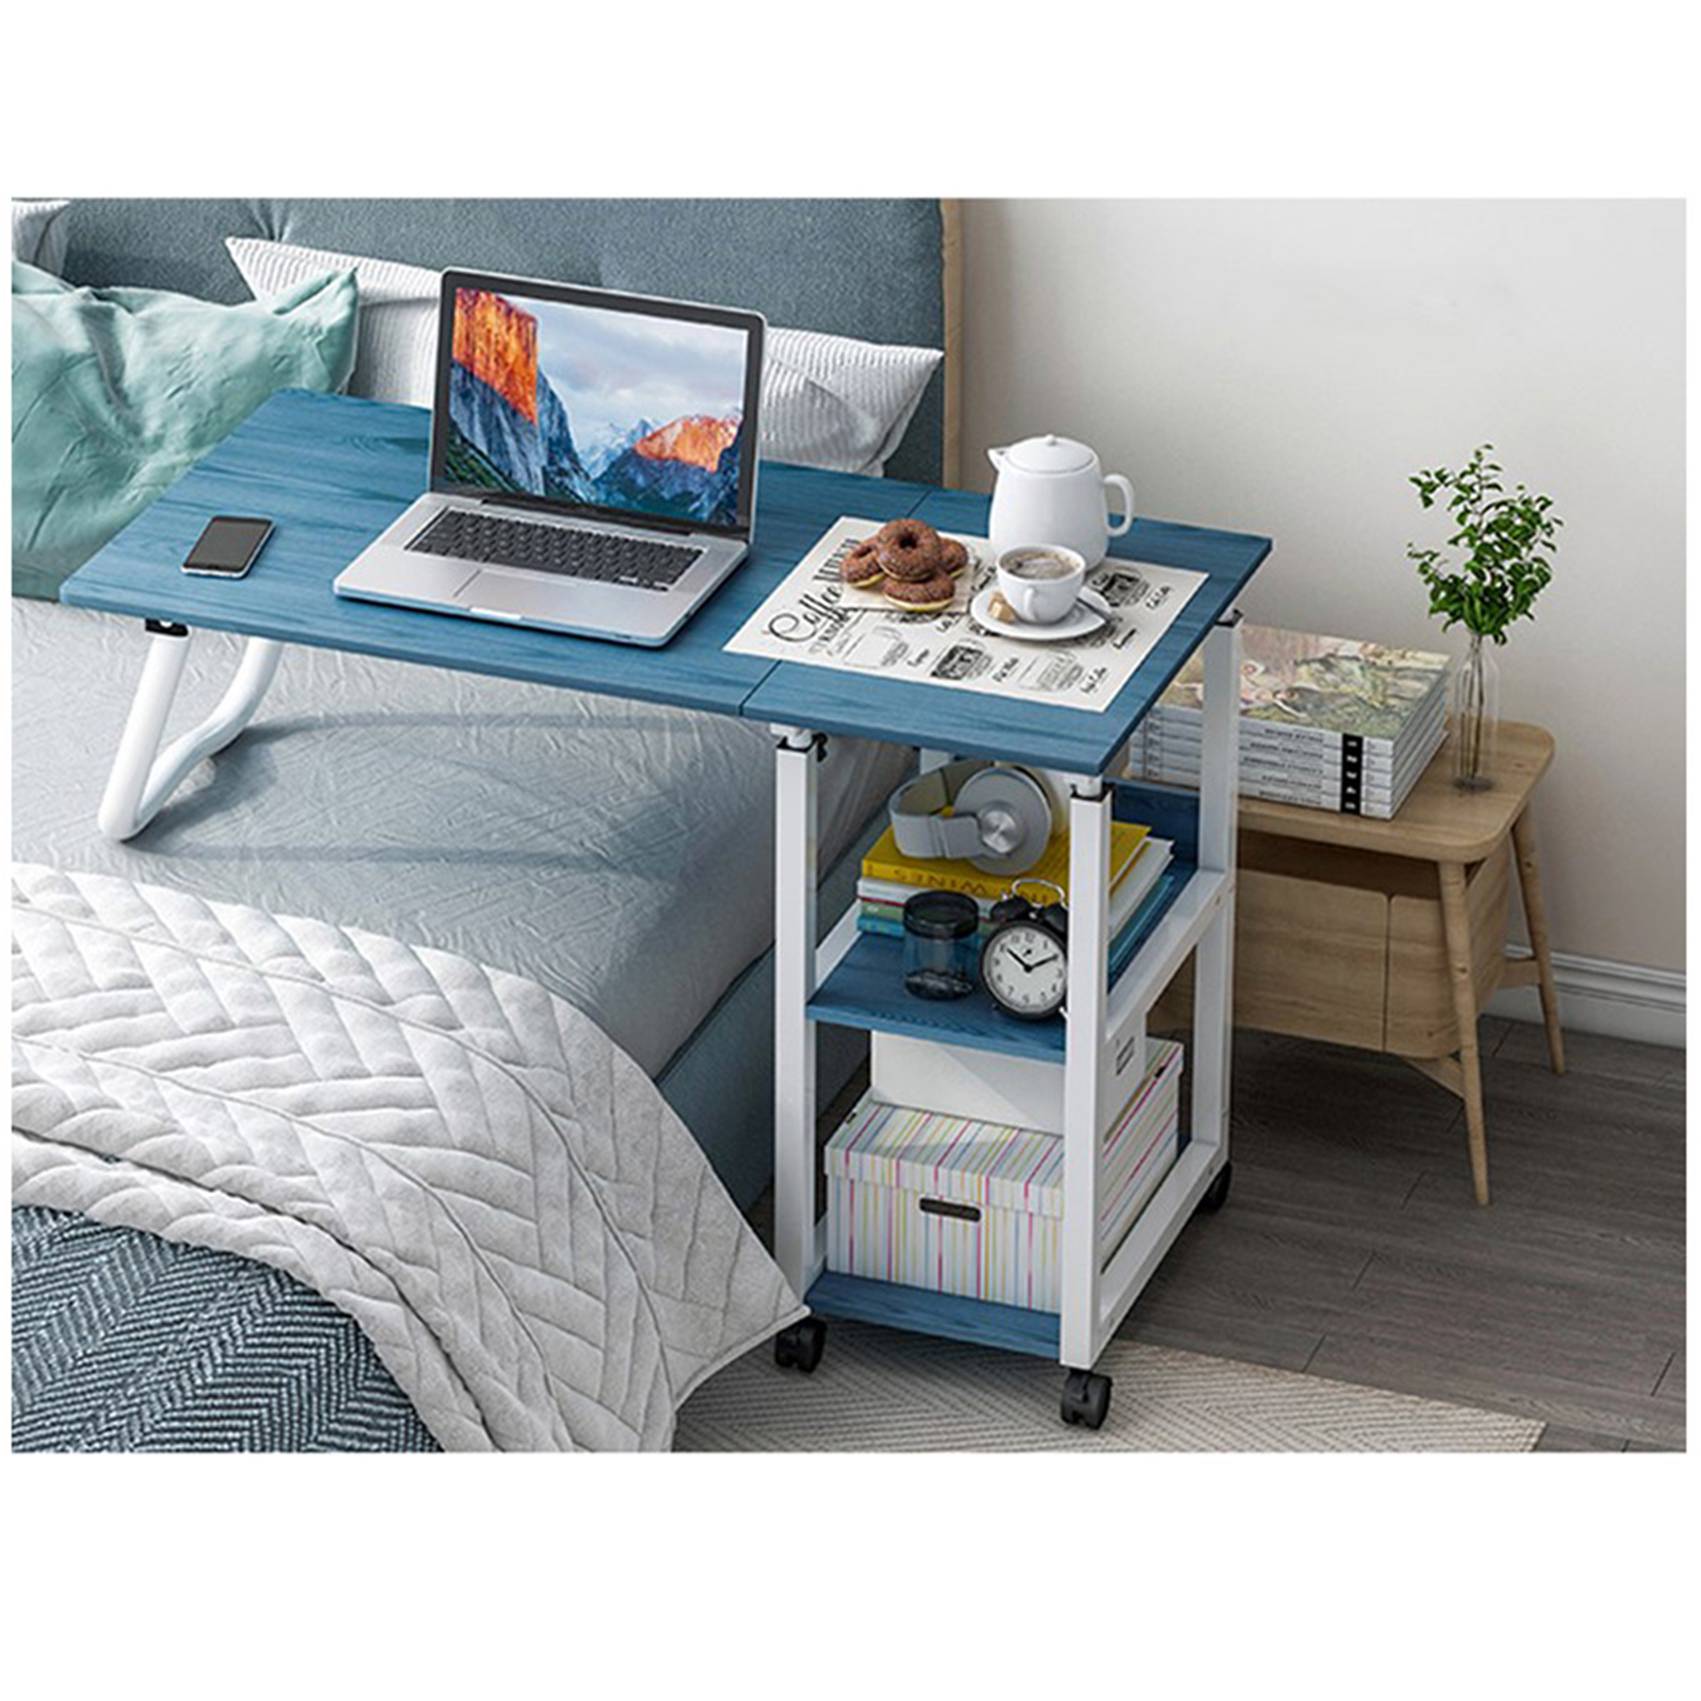 Featured image of post Wooden Bed Table For Study - Choose a desk based on your unique requirements from compact and standard sizes finished in a variety of wooden finishes.